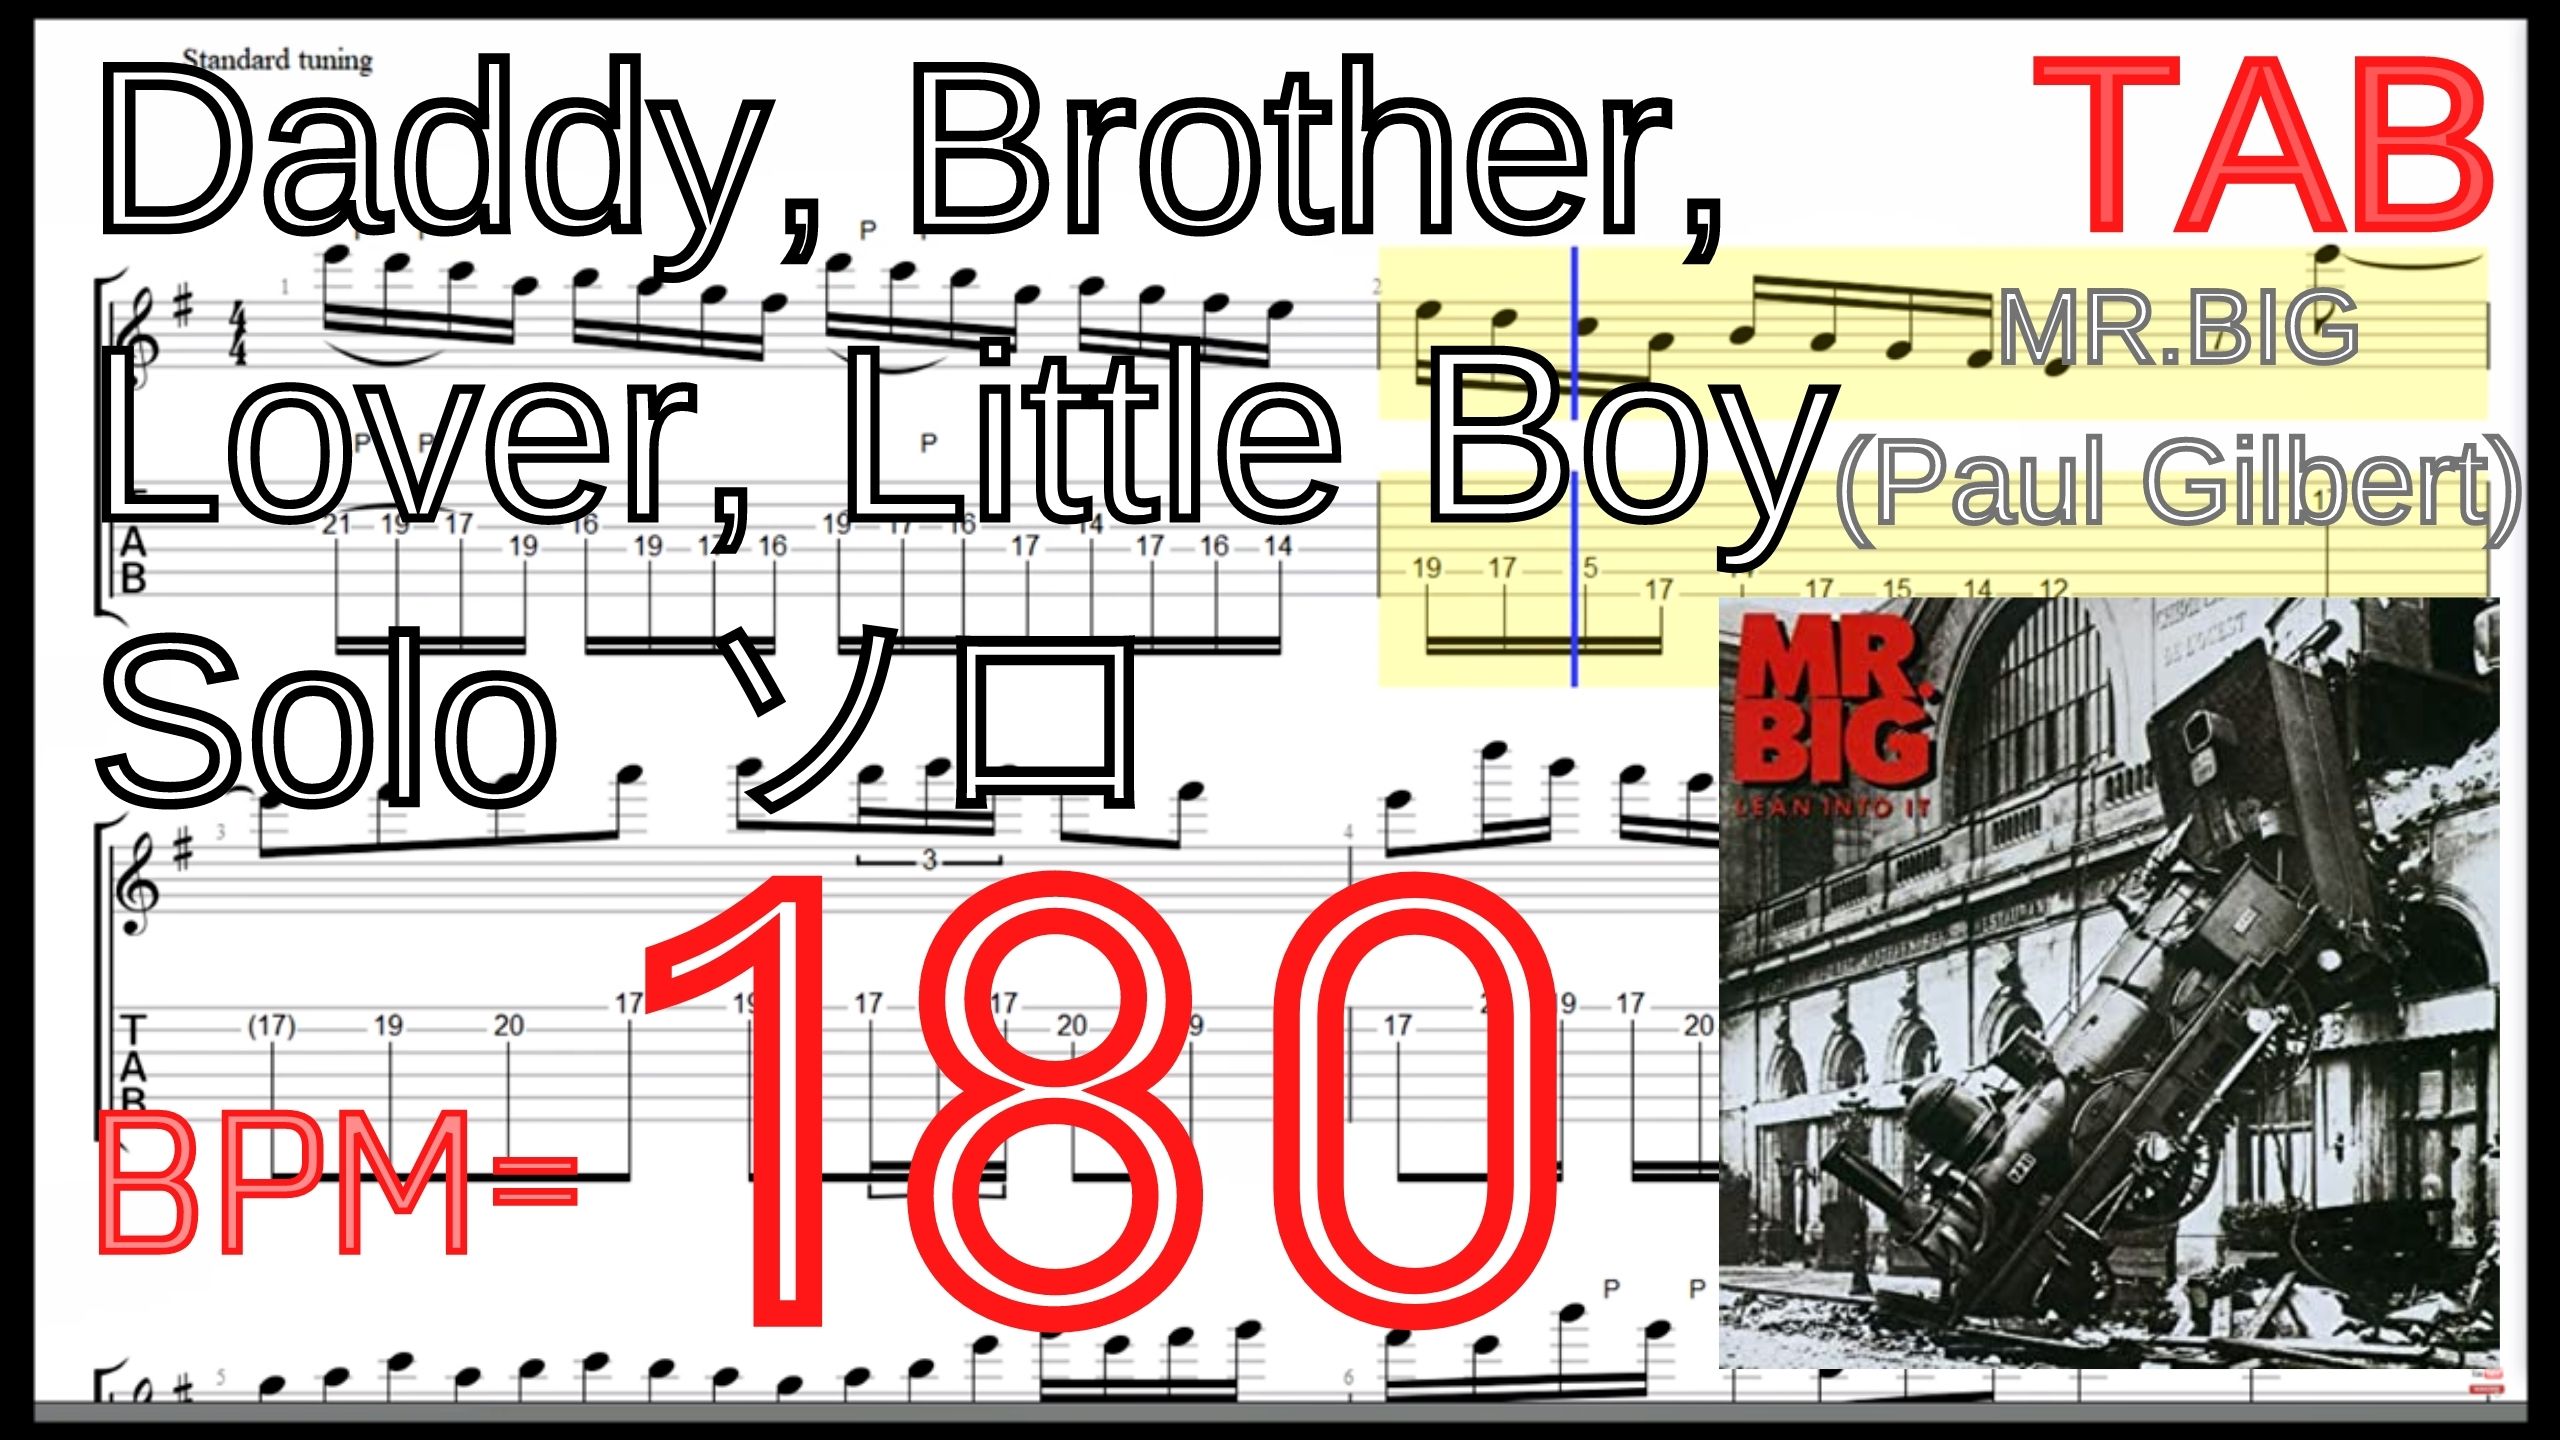 Guitar Picking Best Practice TAB2.Daddy, Brother, Lover, Little Boy[solo] / Mr.Big(Paul Gilbert)